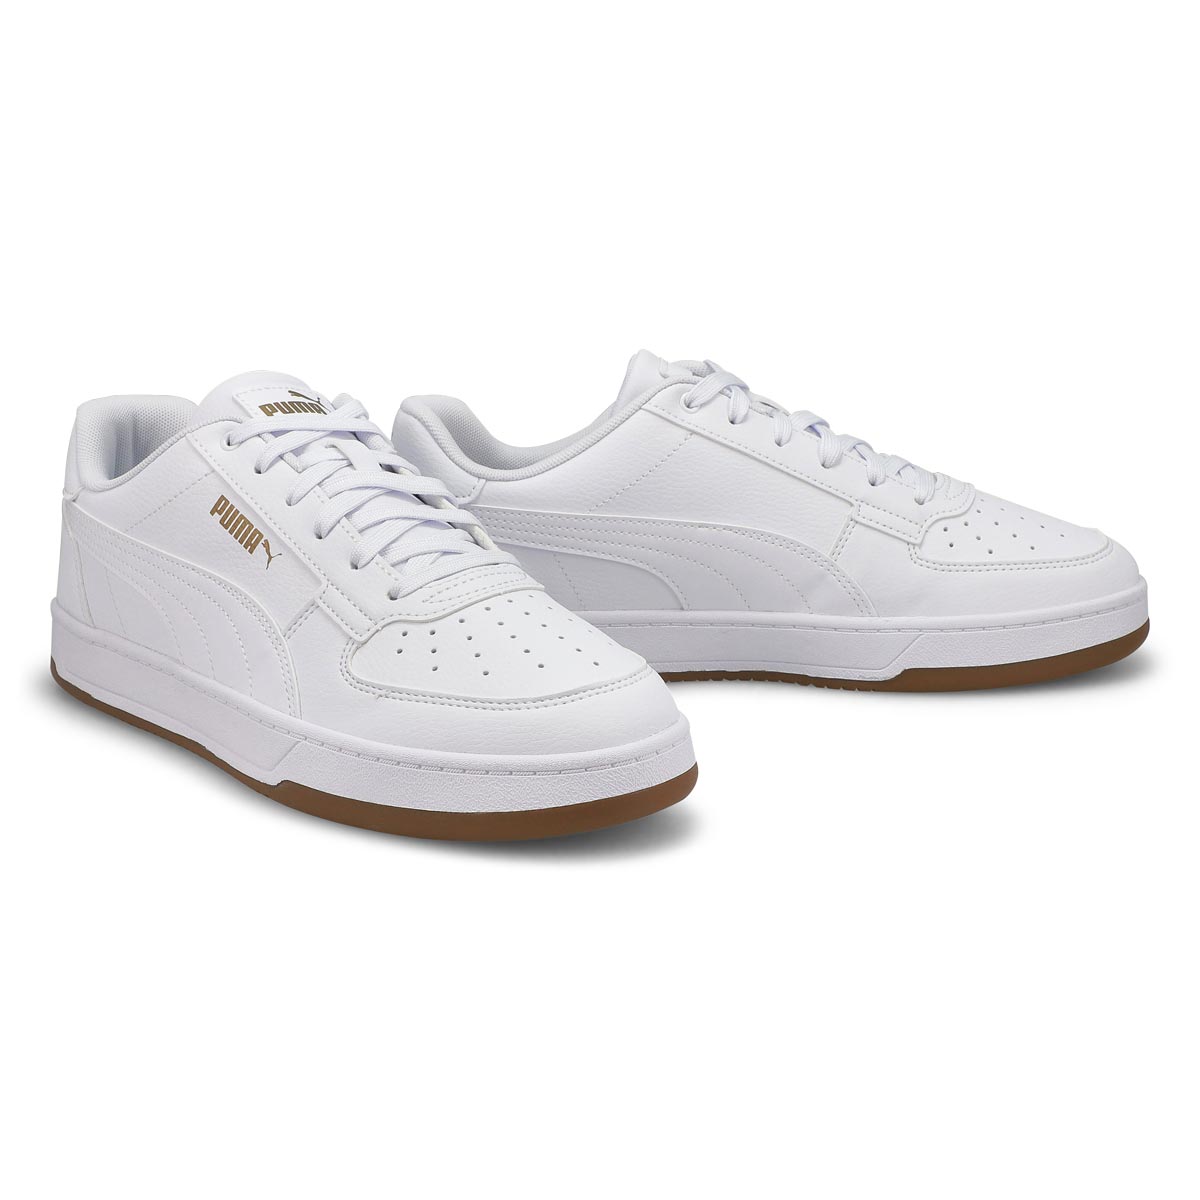 Baskets CAVEN 2.0, blanc/or, hommes